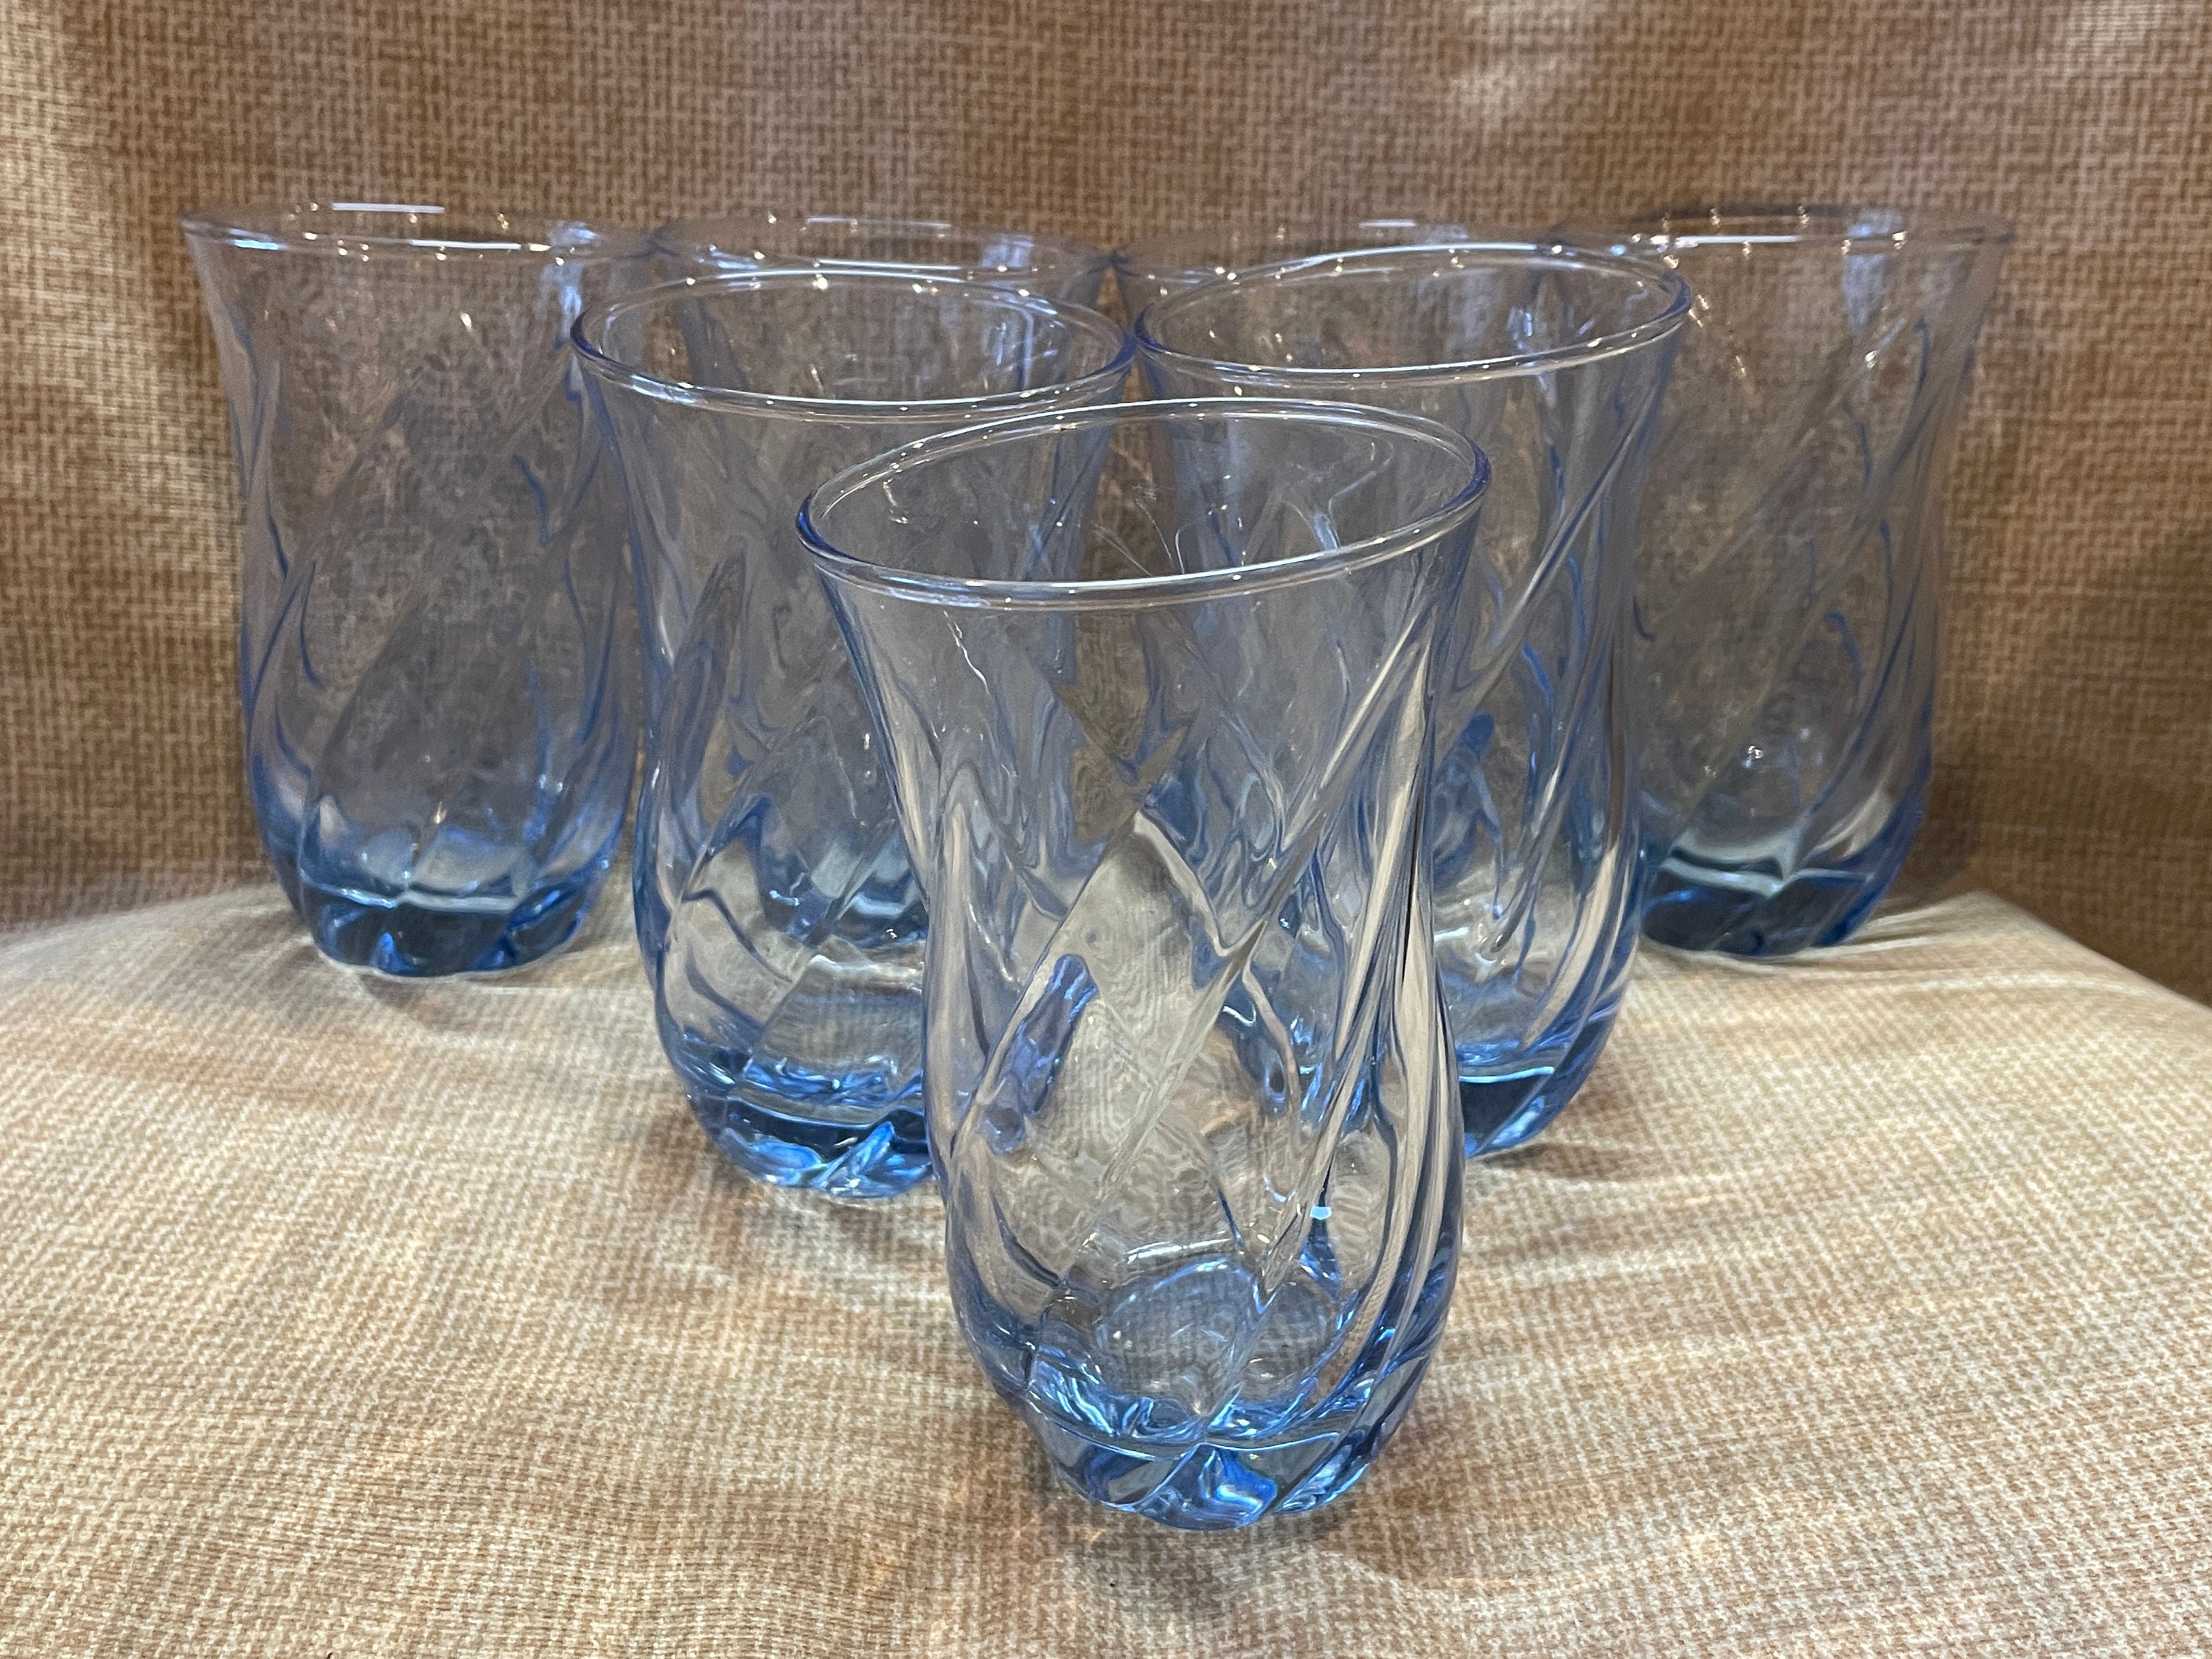 CREATIVELAND 4 Pack Colored Vintage Drinking Glasses, 155 oz Romantic Embossed Water Glasses, Colored Tumblers Tempered Glass, Vintage Glassw